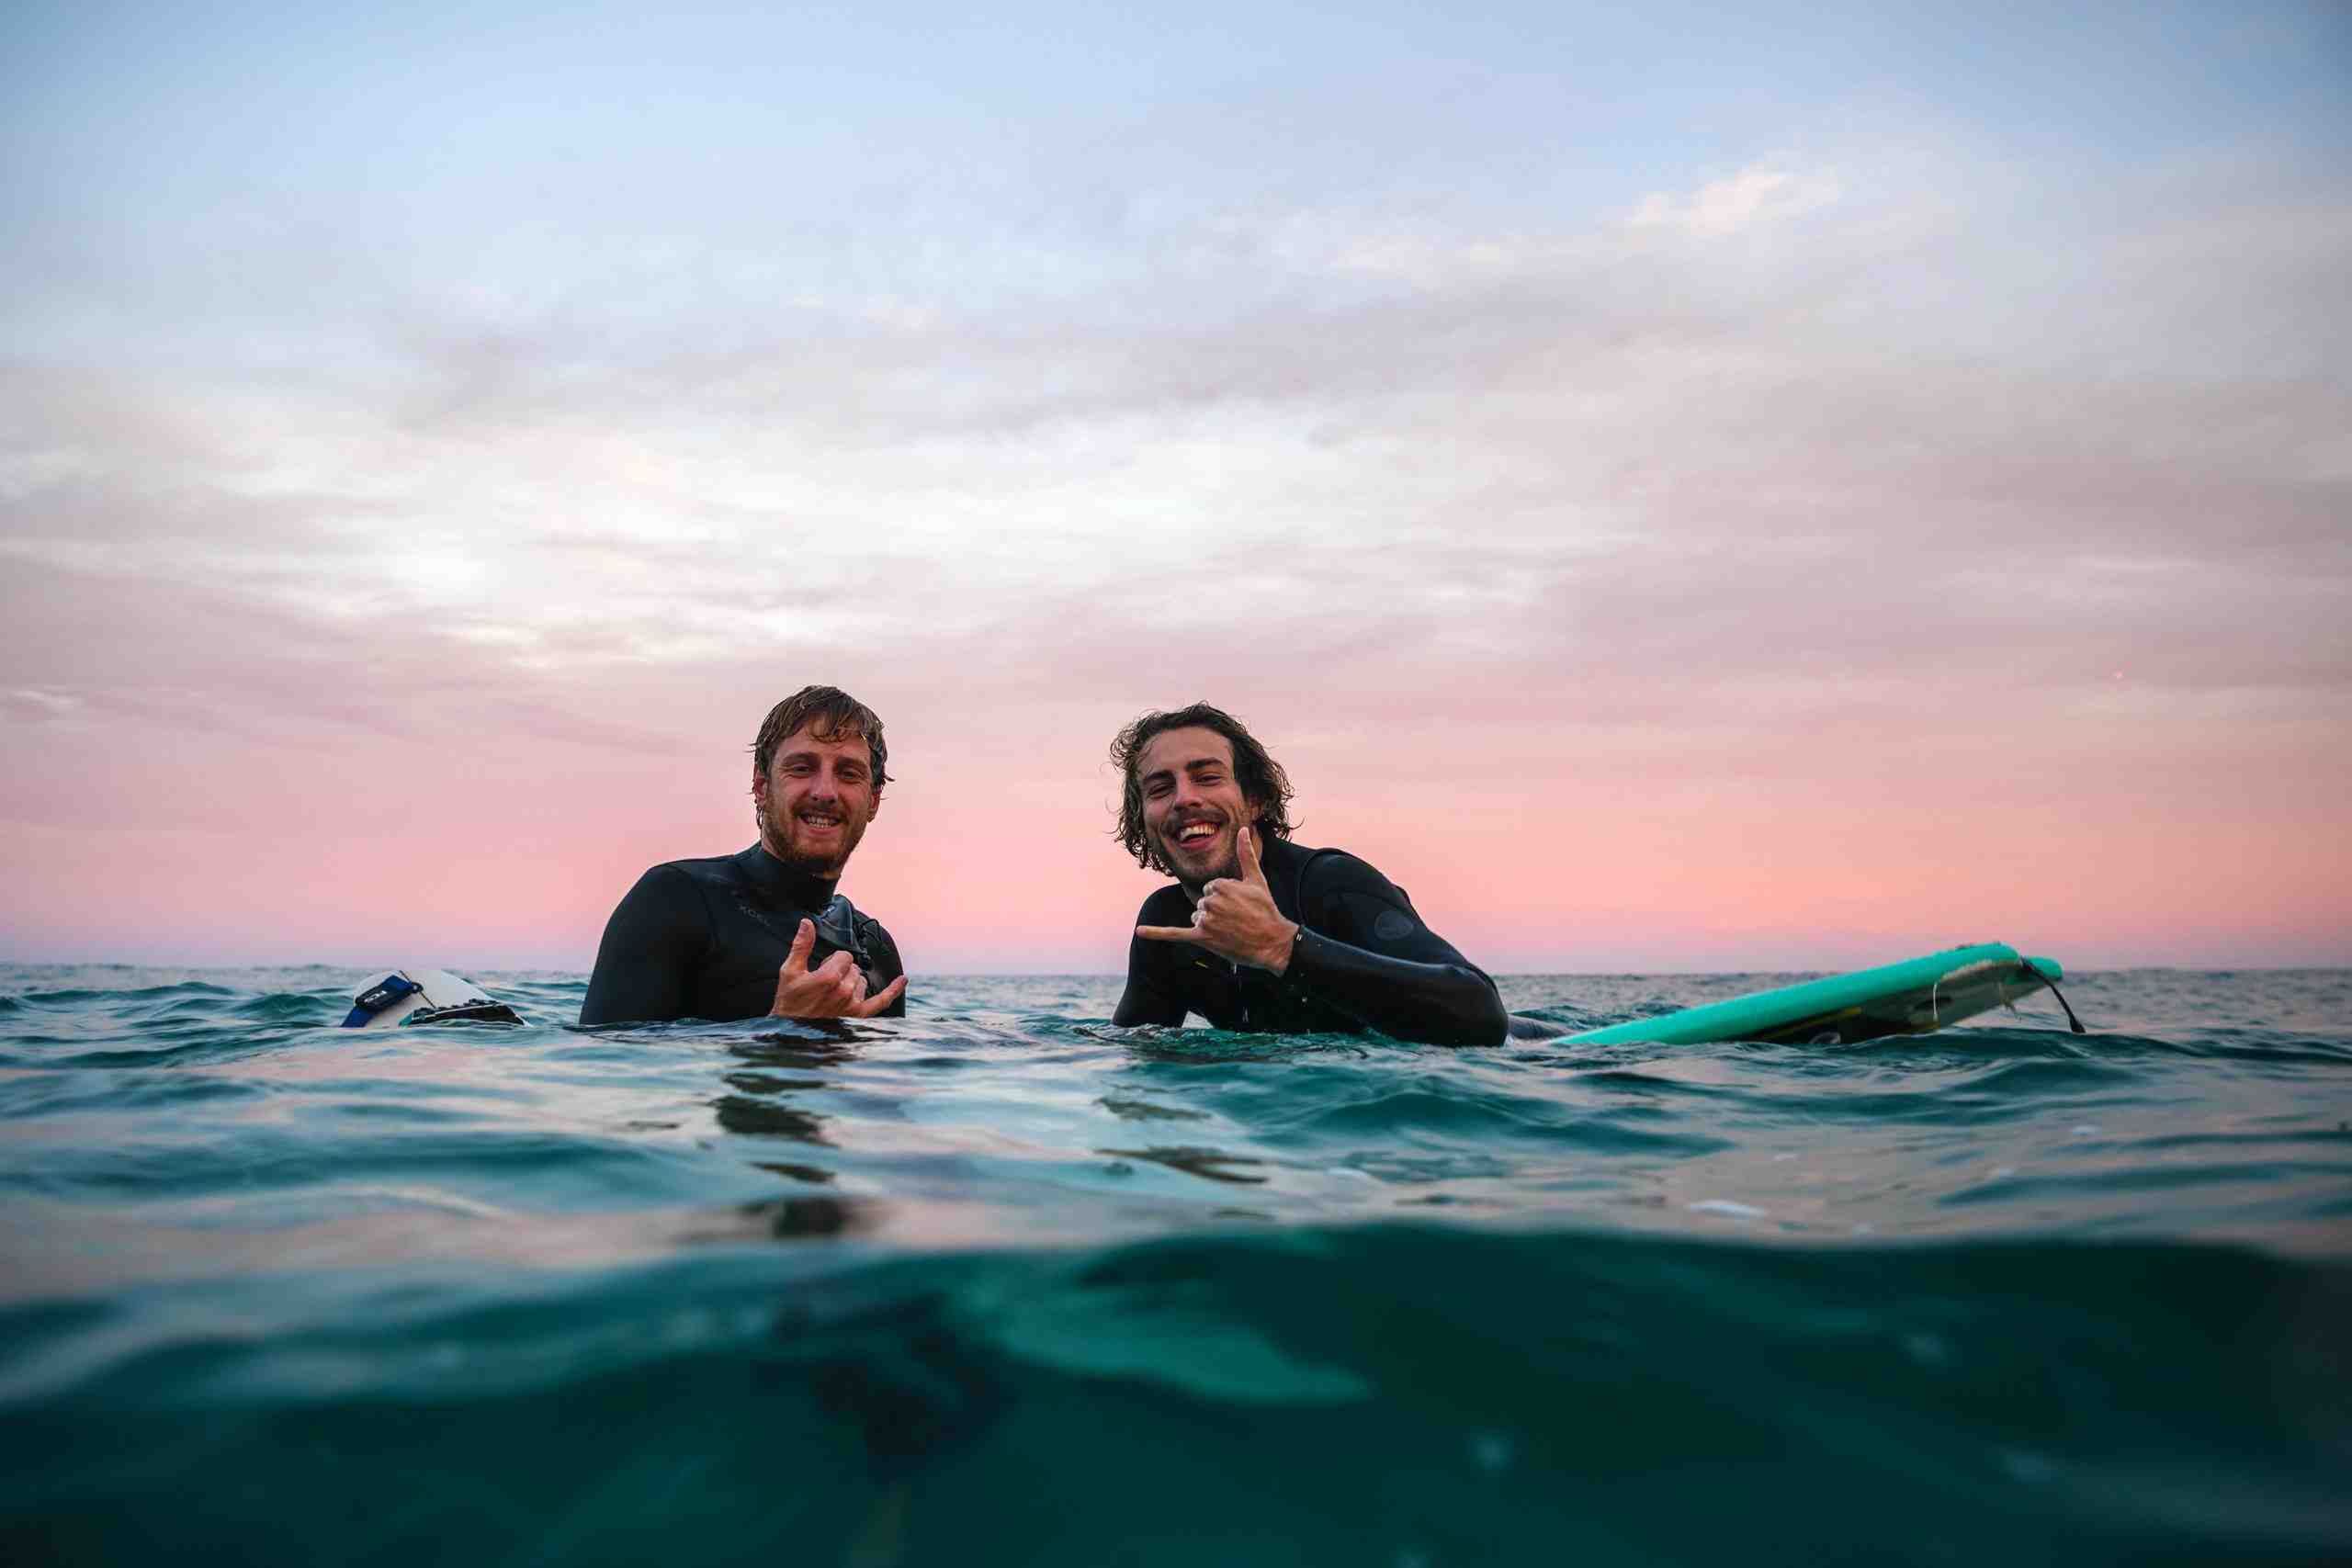 What does glassy mean in surfing?